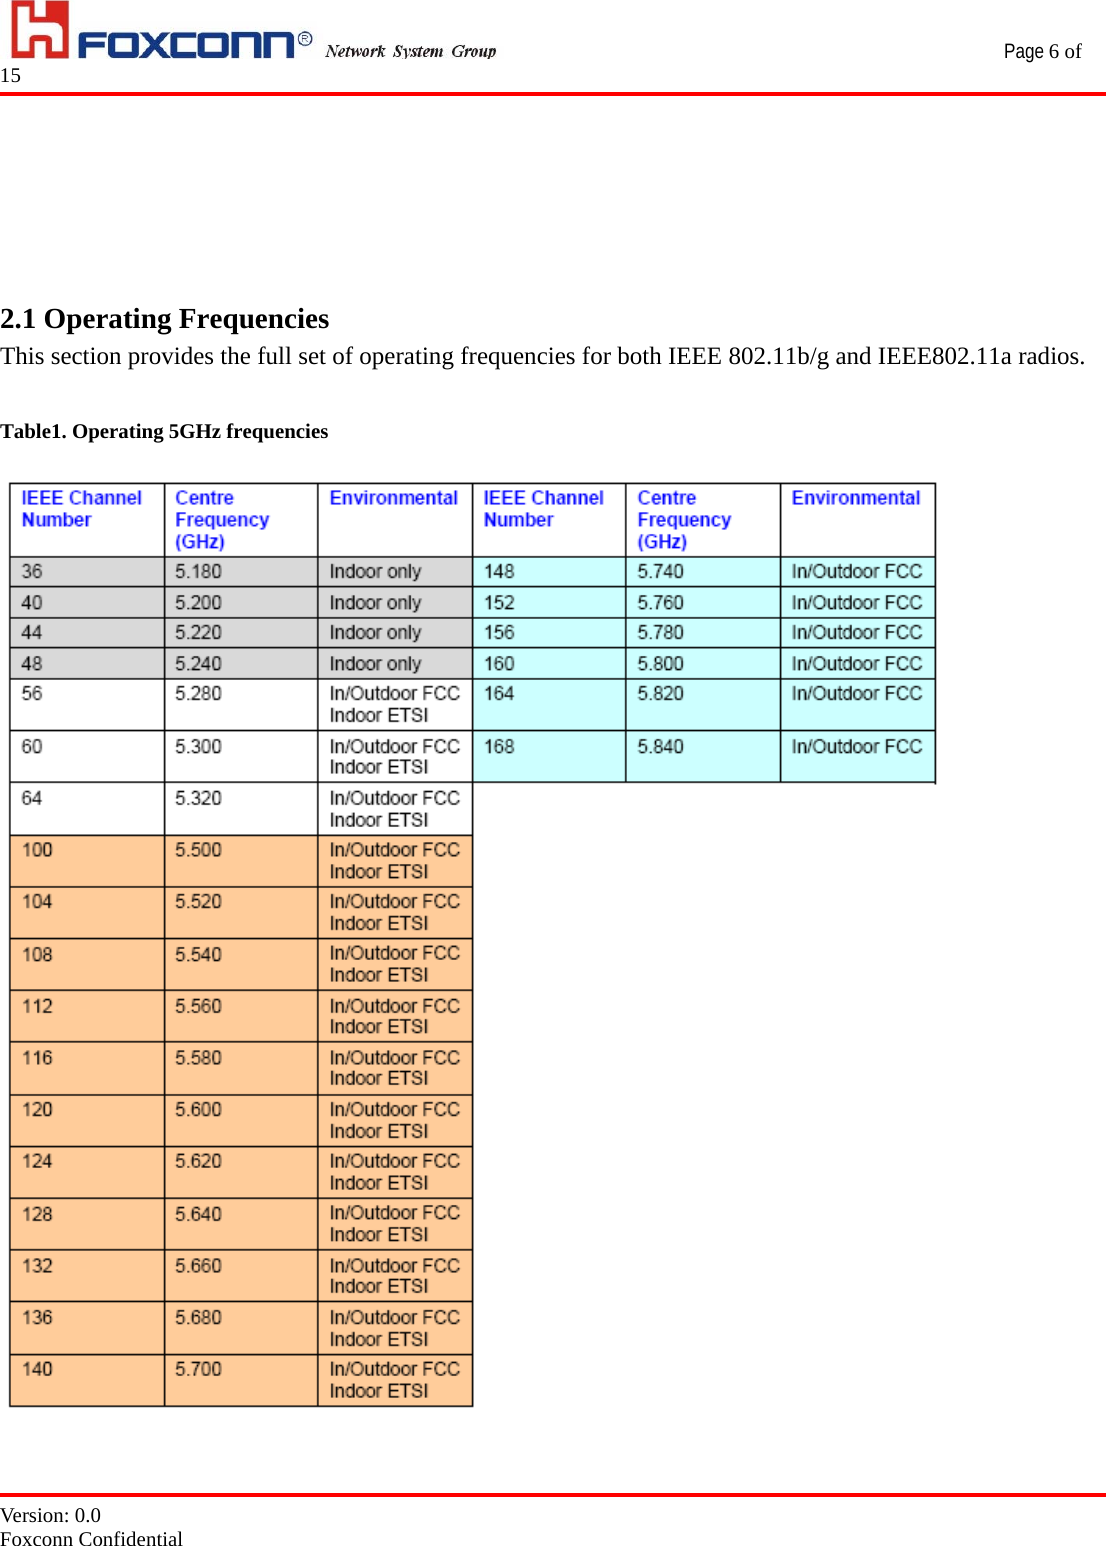                                                 Page 6 of 15   Version: 0.0 Foxconn Confidential      2.1 Operating Frequencies This section provides the full set of operating frequencies for both IEEE 802.11b/g and IEEE802.11a radios.  Table1. Operating 5GHz frequencies   